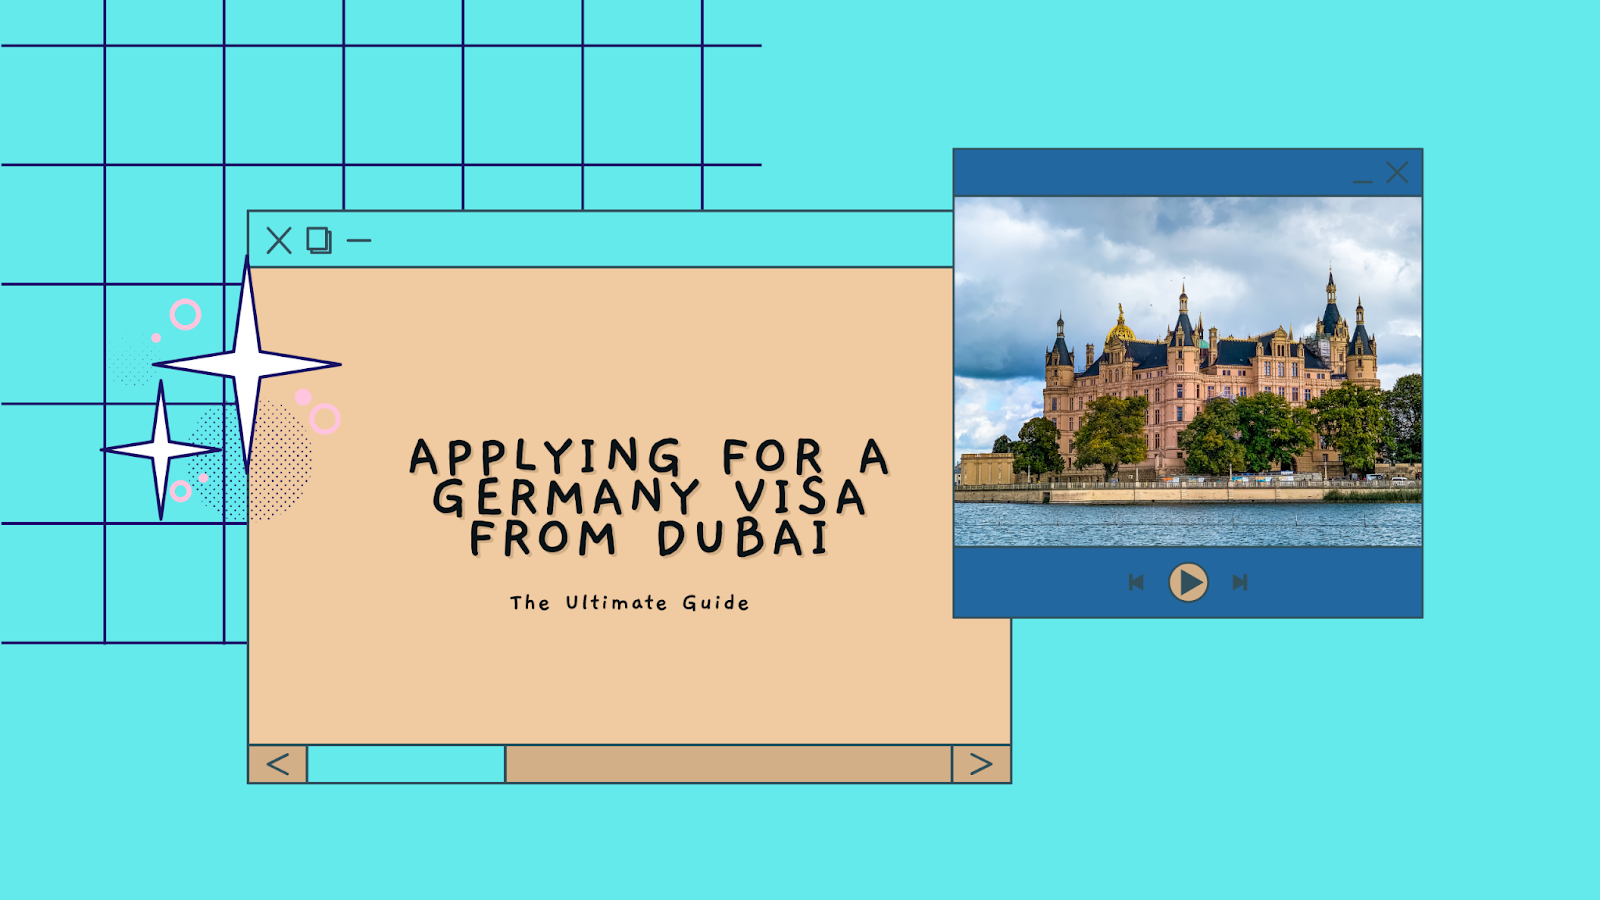 How To Apply for a Germany Visa From Dubai?